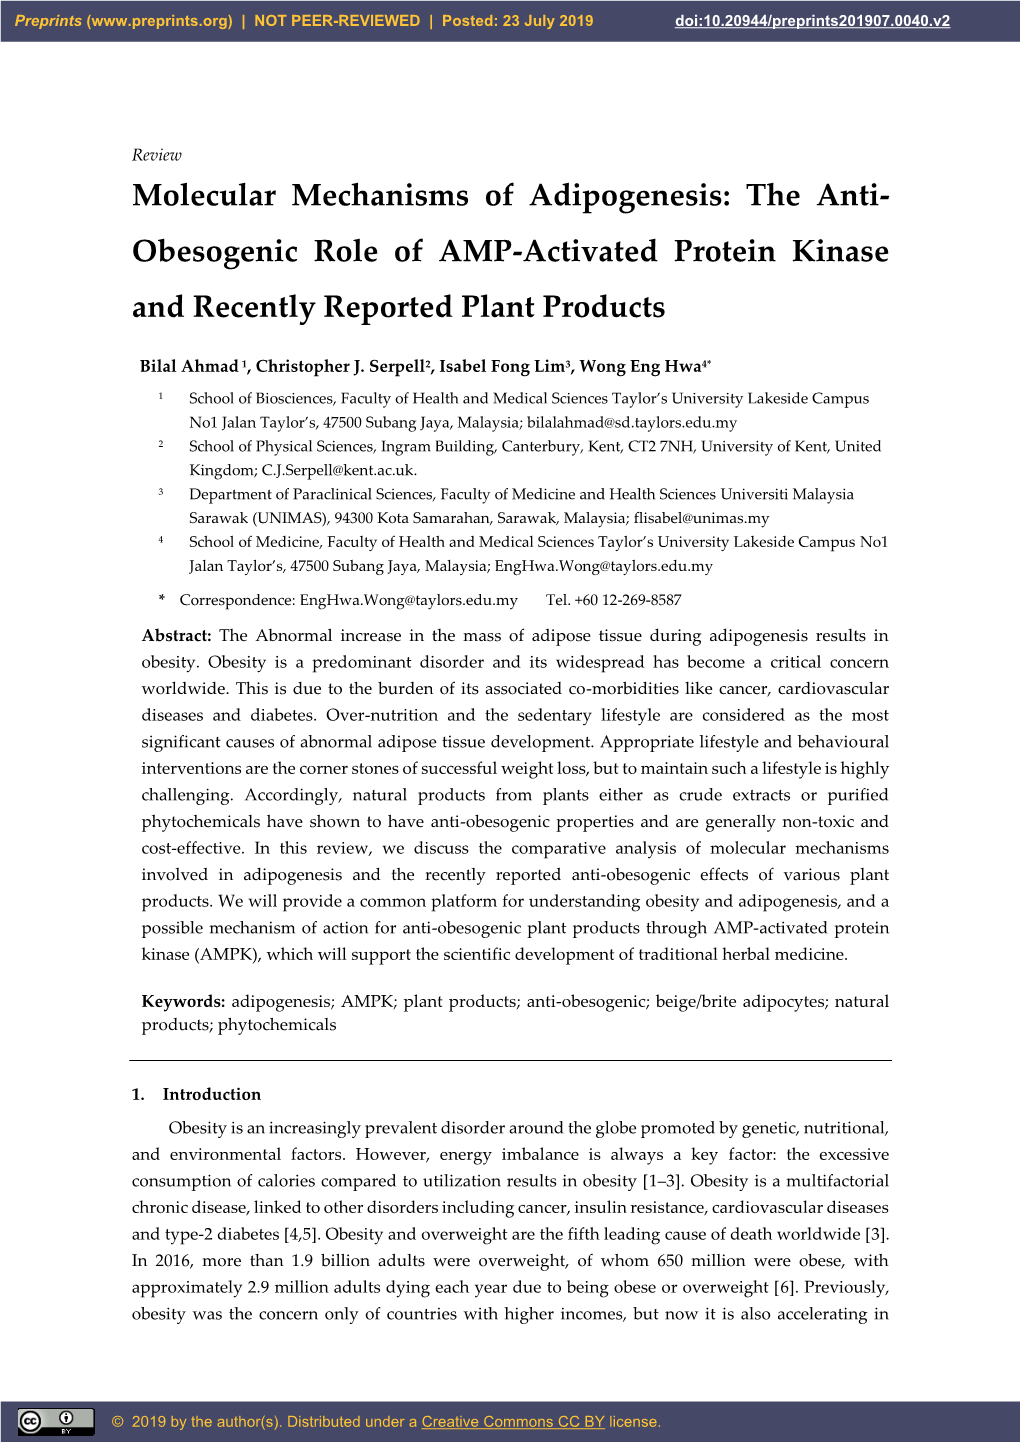 Molecular Mechanisms of Adipogenesis: the Anti- Obesogenic Role of AMP-Activated Protein Kinase and Recently Reported Plant Products